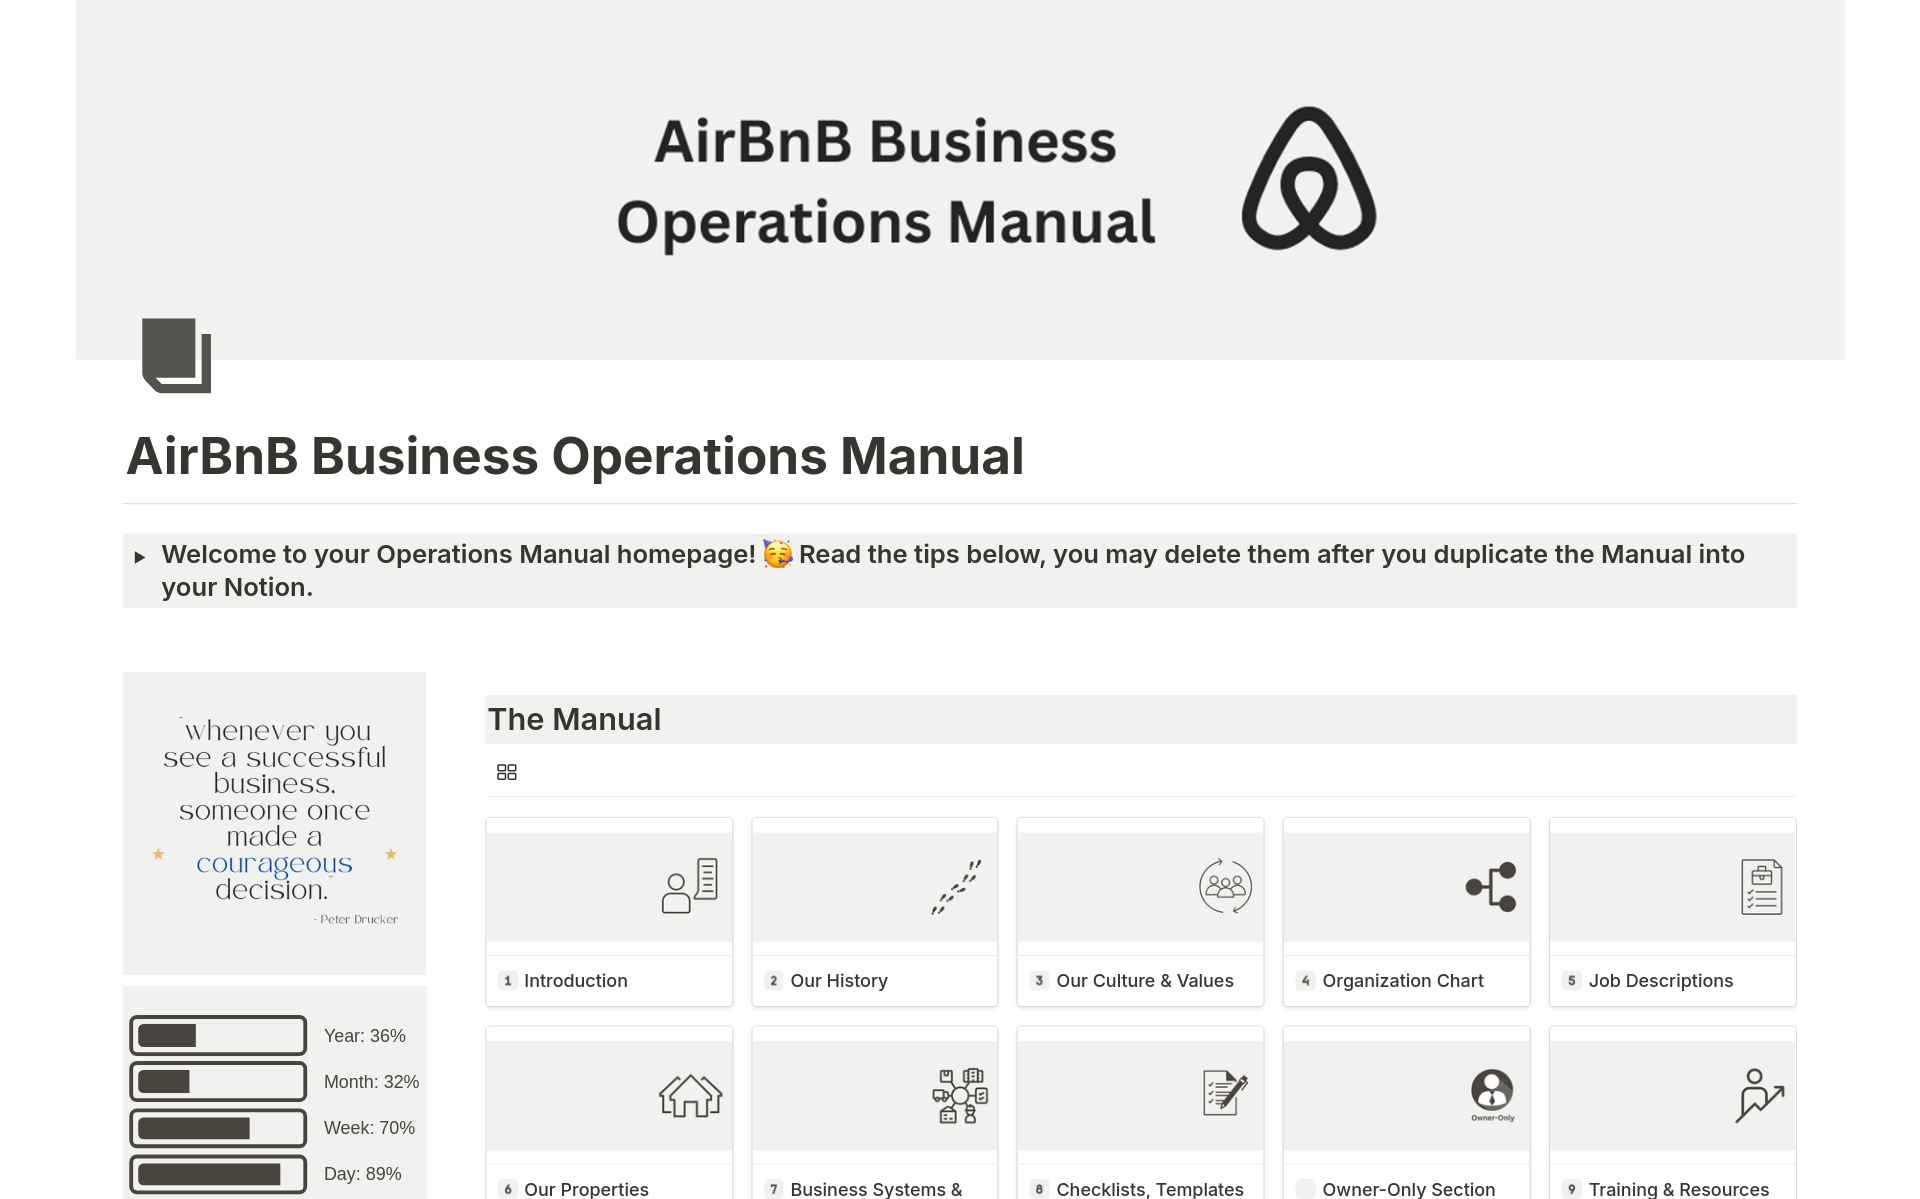 Ideal for any Airbnb business owner who wants to keep a clean, organized, and easy-to-navigate single source of knowledge for their business and team. Pre-built with 60+ sections of standard and best practices in Airbnb operations,